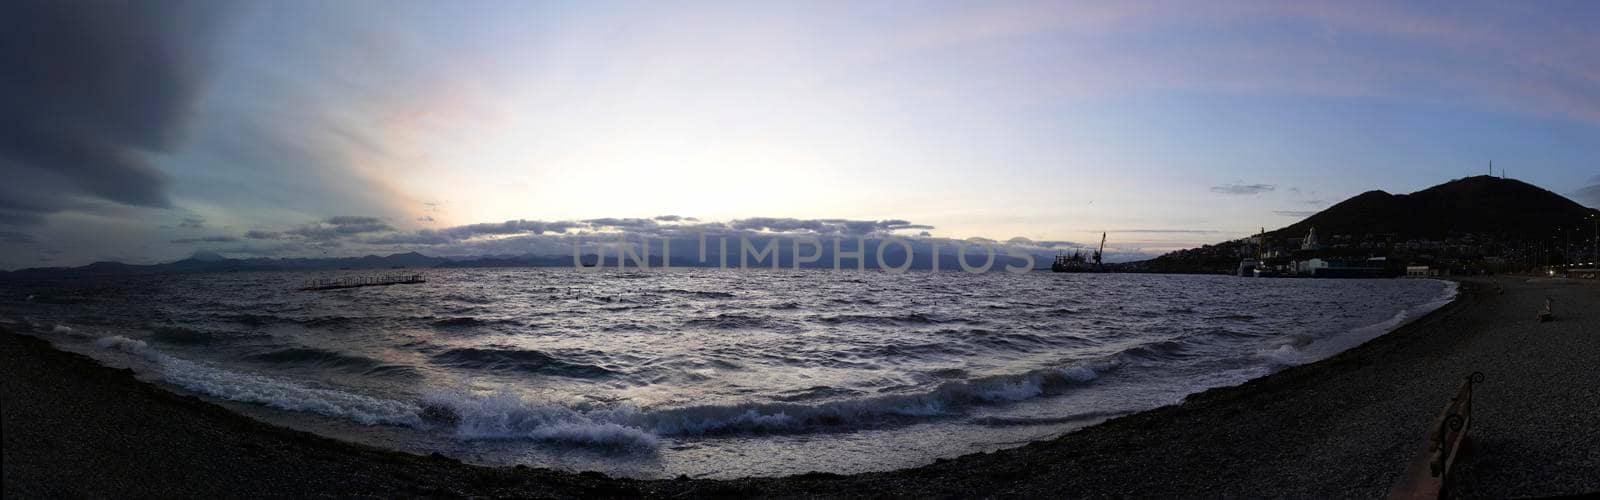 Panorama of the sea landscape in the evening on the waterfront of the city. Petropavlovsk-Kamchatsky, Russia.